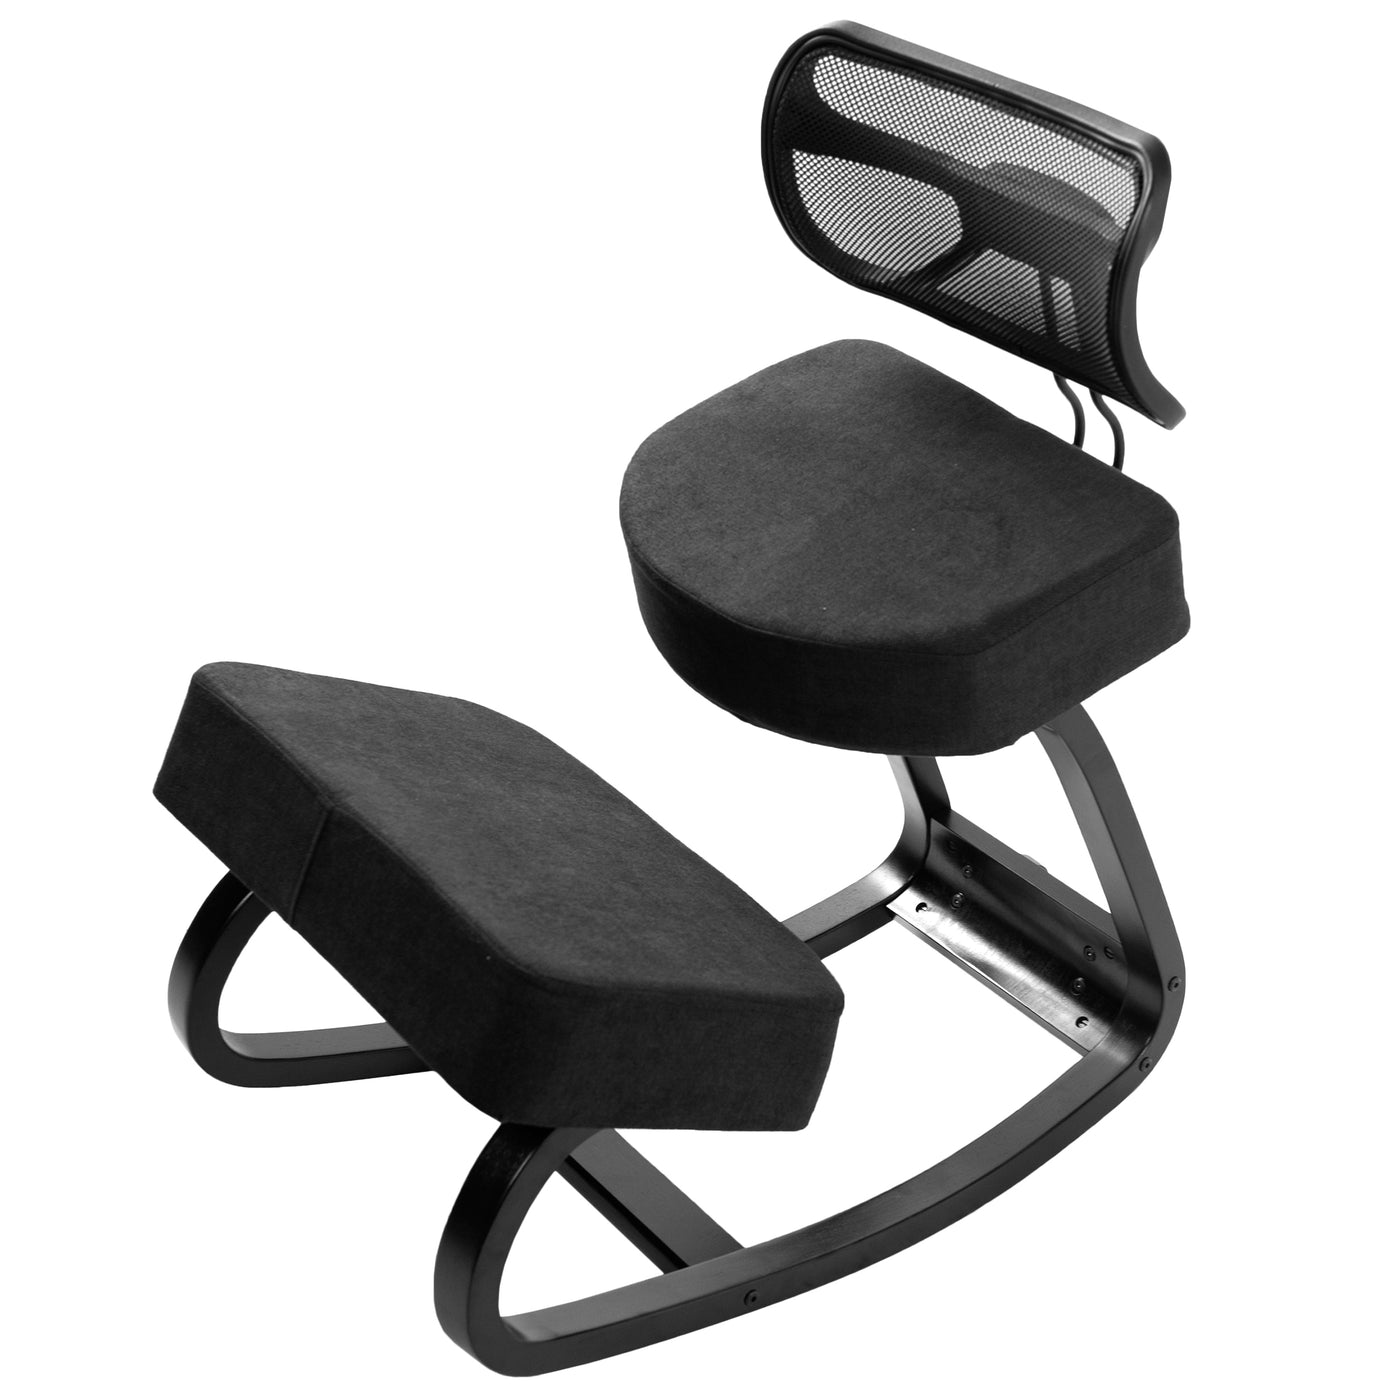 All-black kneeling chair with back support.